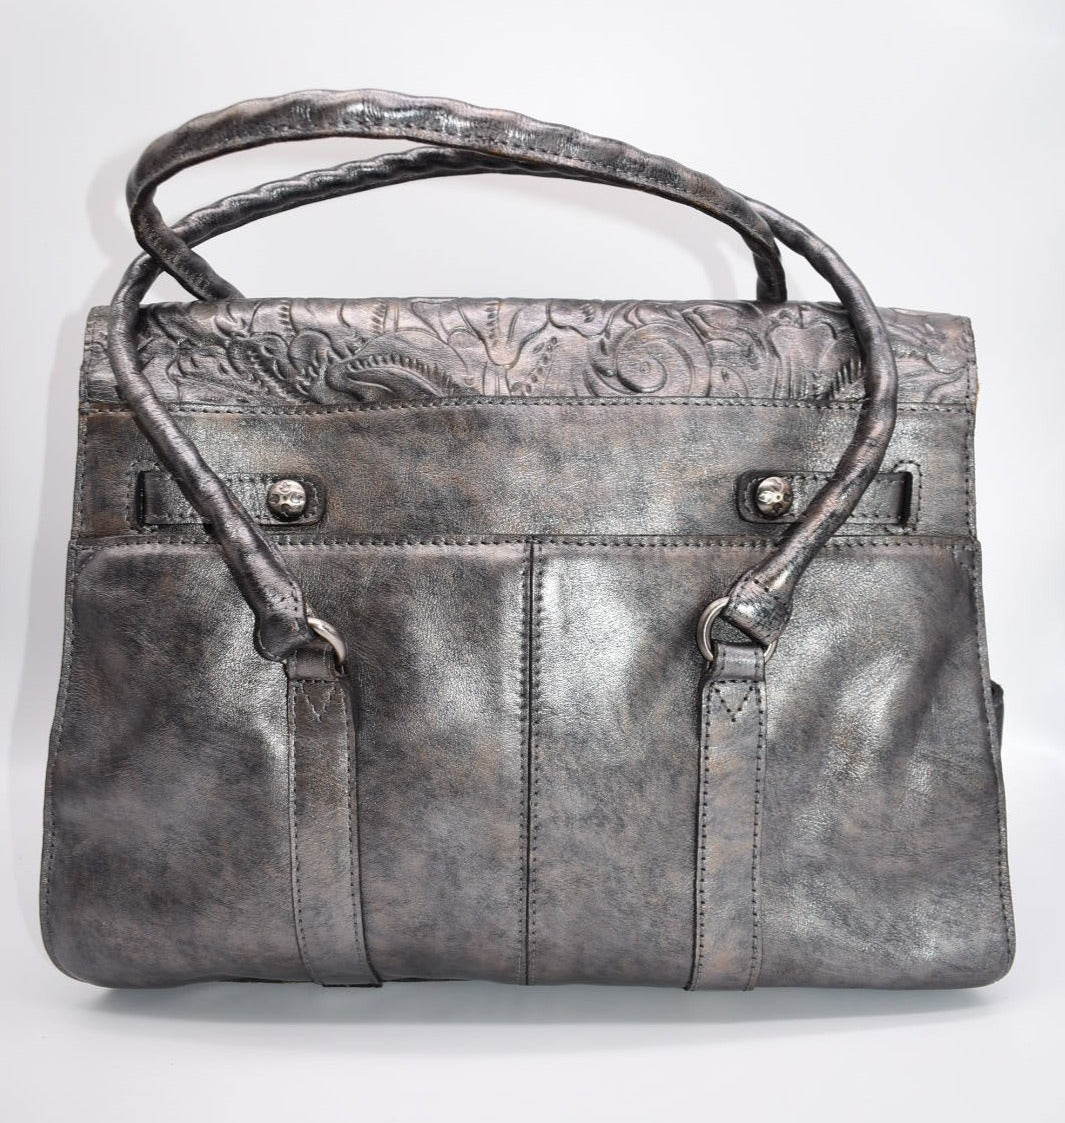 Patricia Nash Vienna Satchel Bag in Tooled Pewter